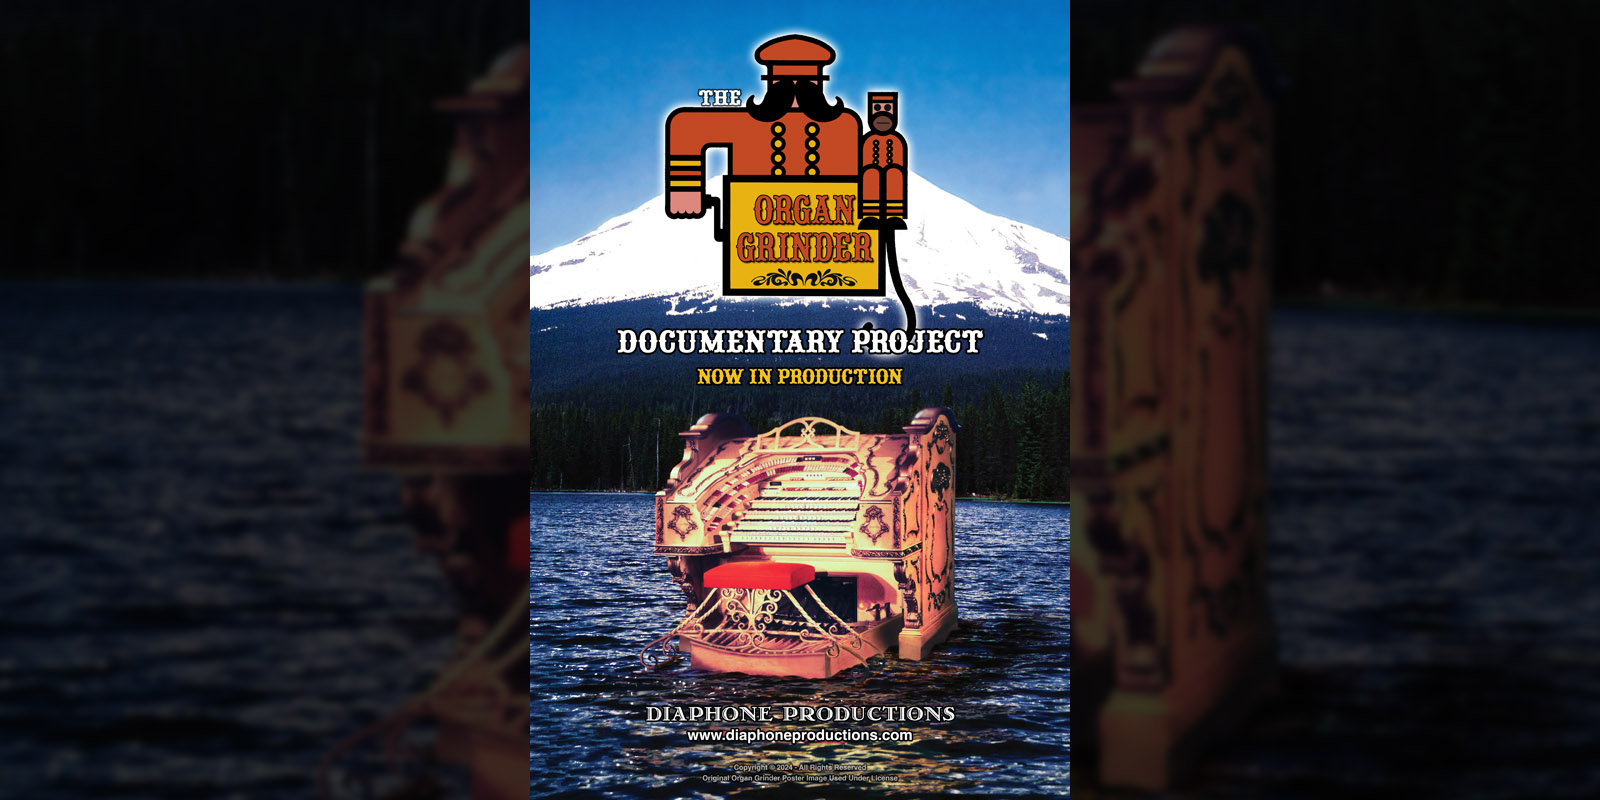 A large, richly decorated 4-manual Wurlitzer organ console sits superimposed on a mountain lake with a forest in the background. The original Organ Grinder stylized "Hurdy Gurdy" logo appears at the top, with graphical text, "The Organ Grinder Documentary Project".